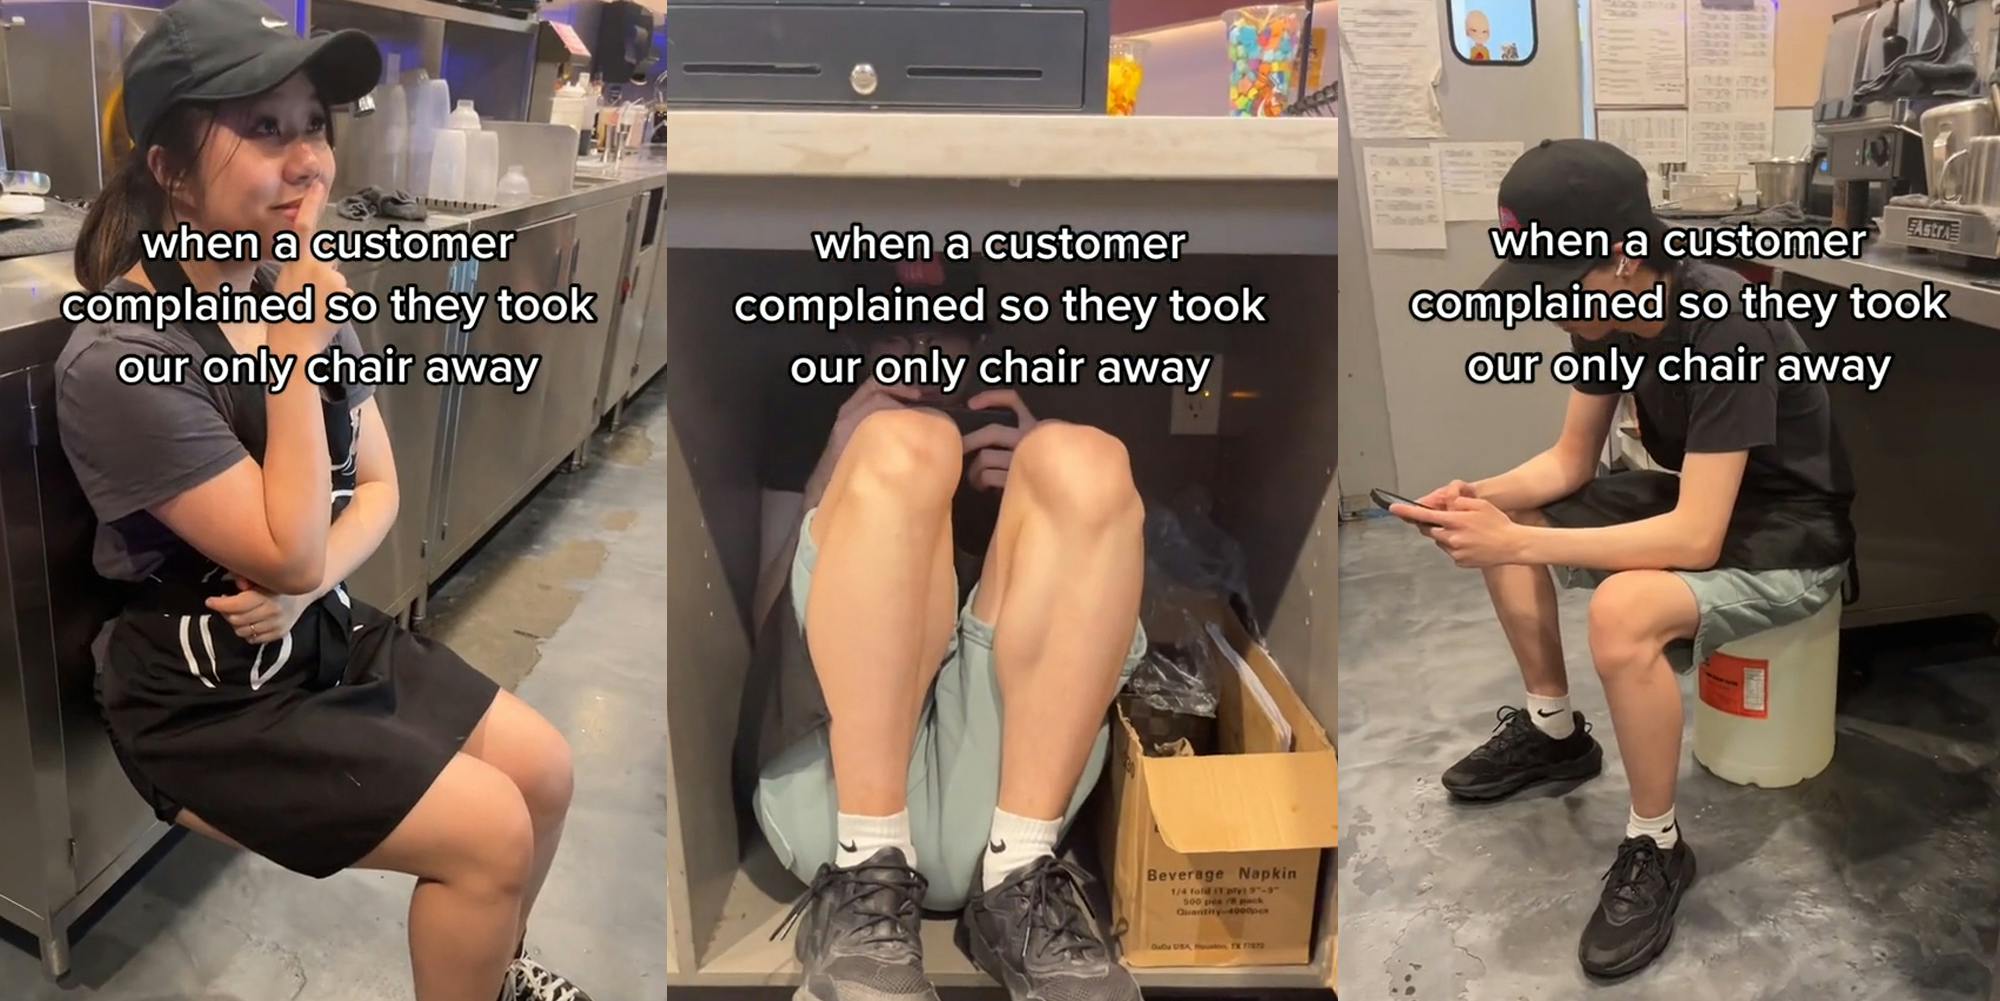 worker squatting against metal counter with caption "when a customer complained so they took our only chair away" (l) worker curled up under counter with caption "when a customer complained so they took our only chair away" (c) worker sitting on upside down bucket with caption "when a customer complained so they took our only chair away" (r)